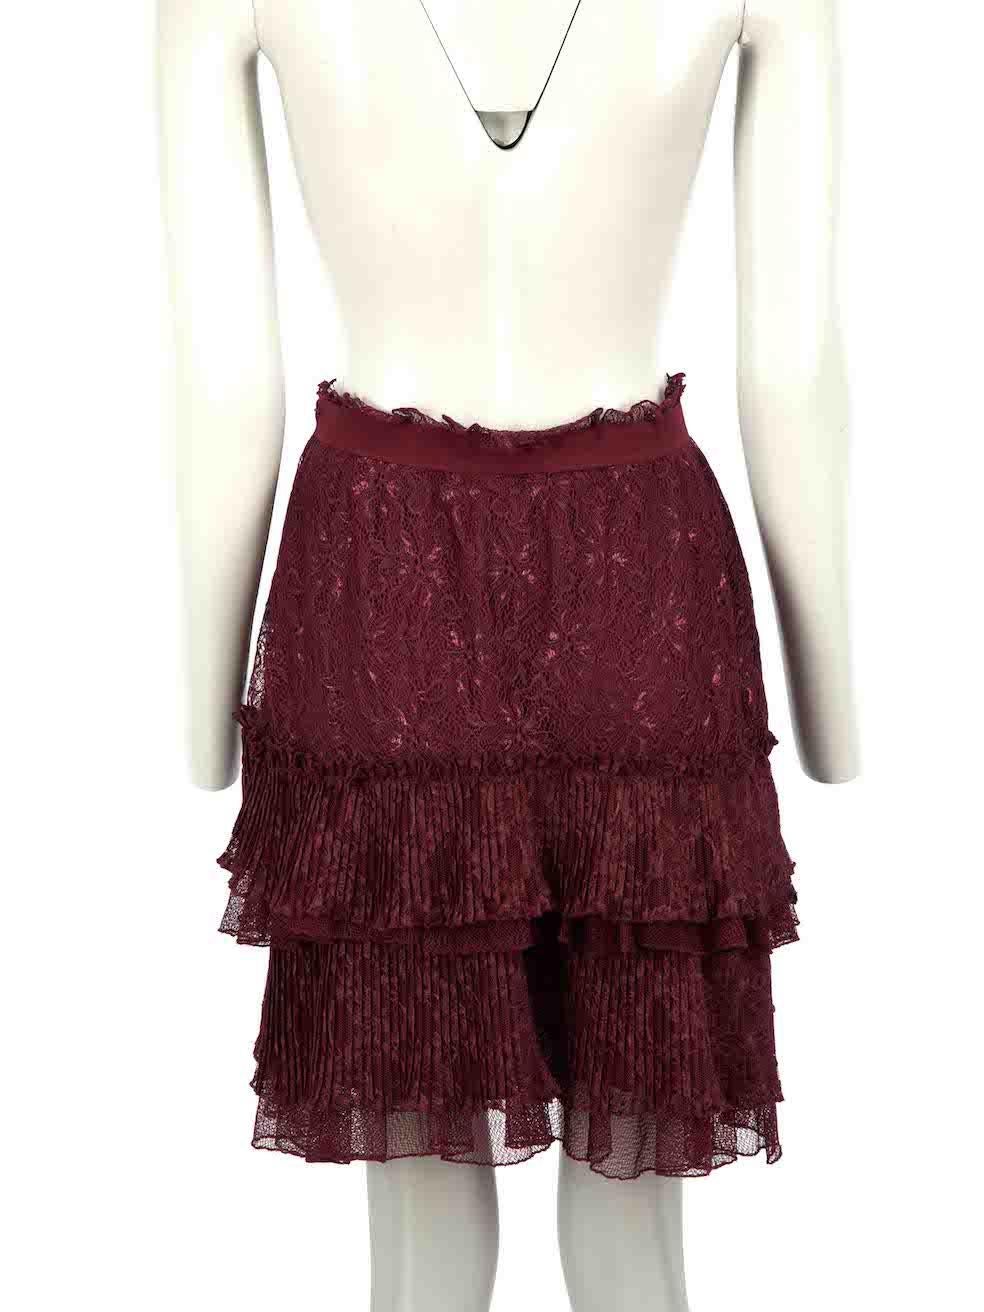 Roberto Cavalli Just Cavalli Burgundy Lace Mini Skirt Size S In Excellent Condition For Sale In London, GB